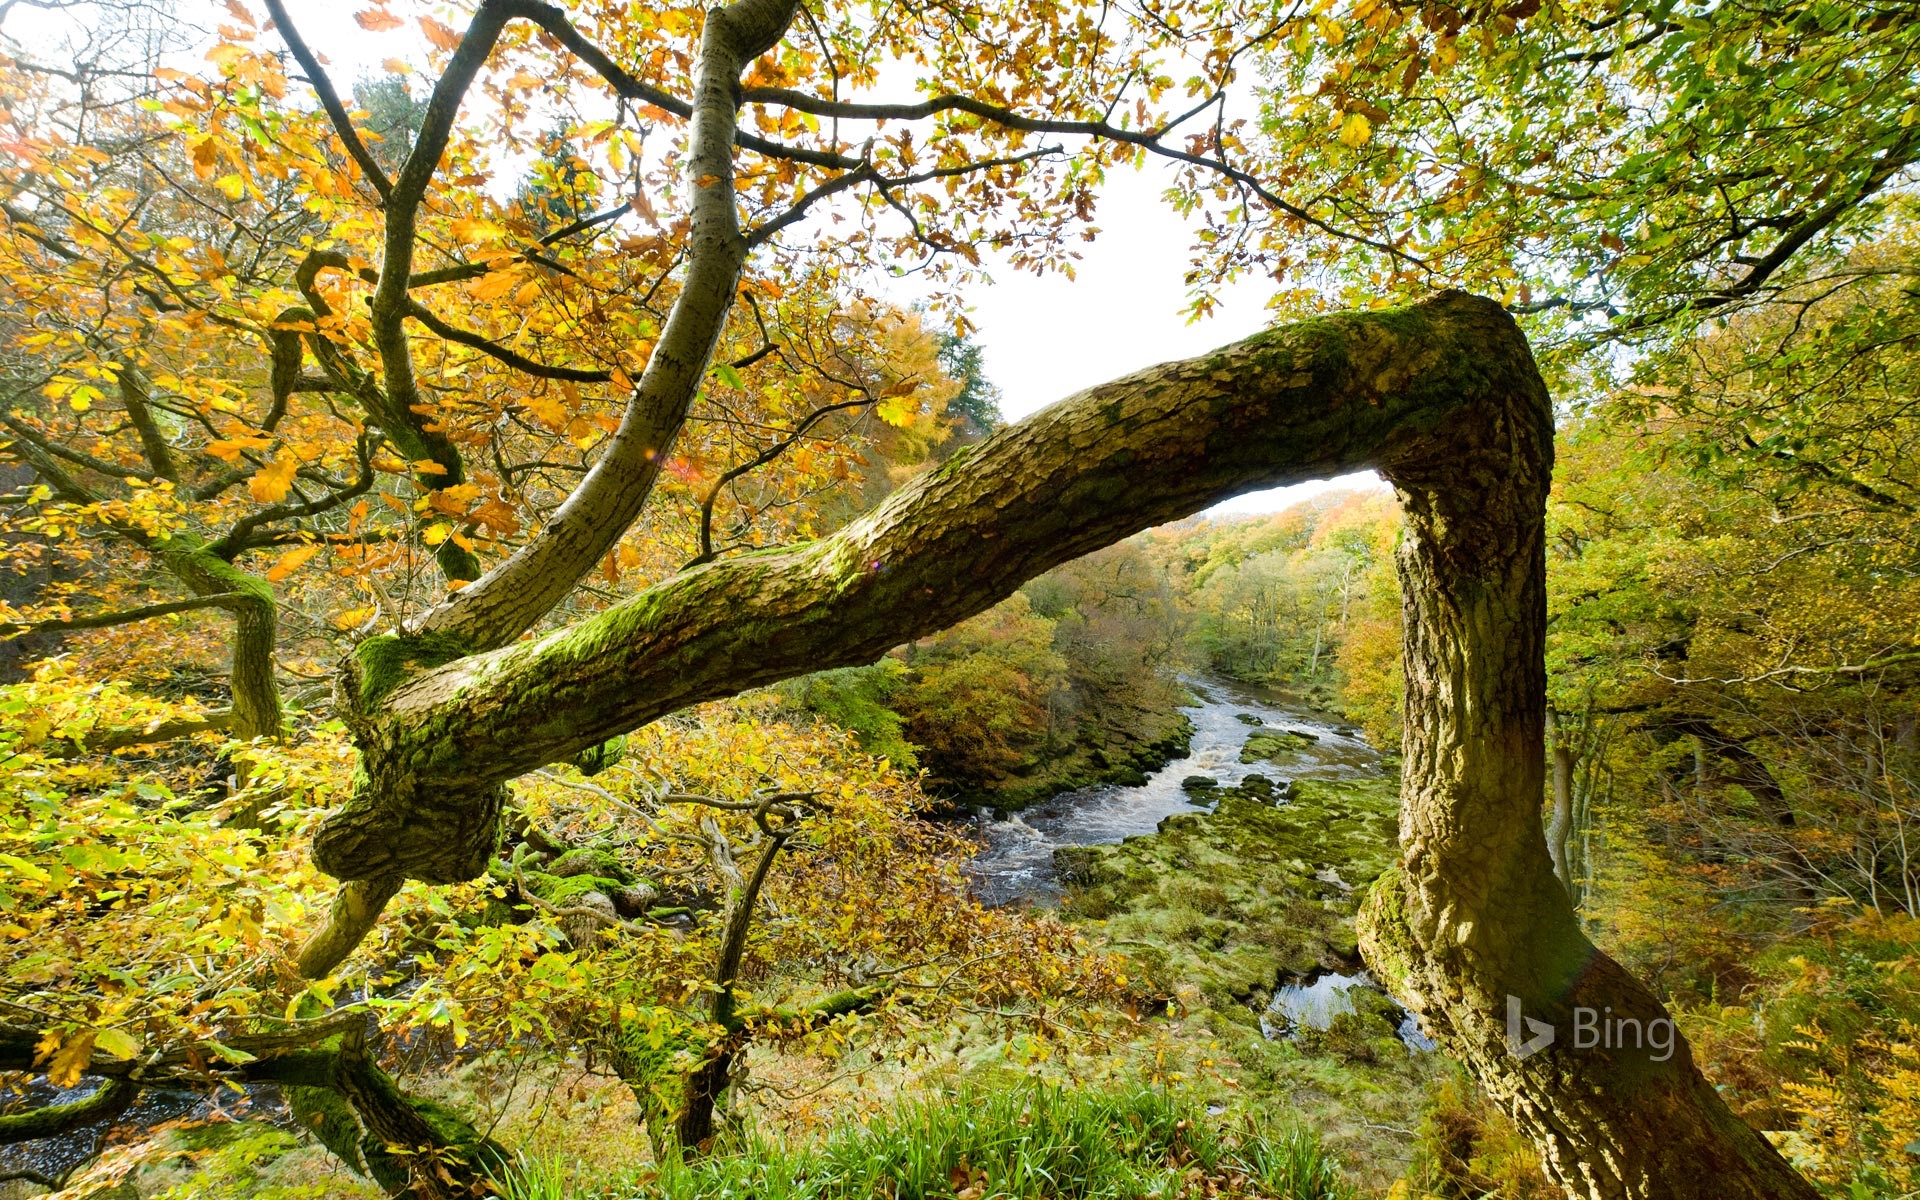 Views from Strid Wood over the River Wharfe in North Yorkshire